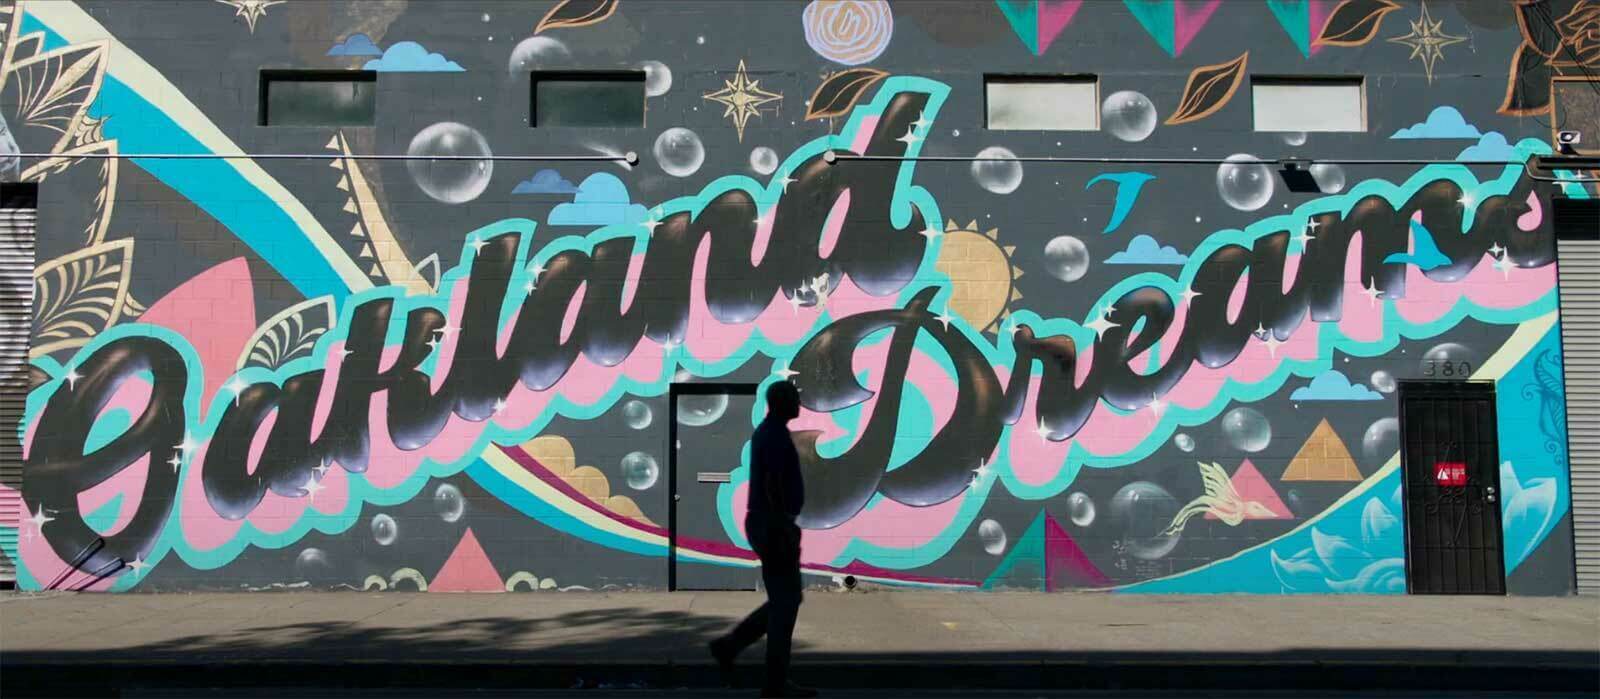 Bubbly and colorful graffiti reads 'Oakland Dreams' on an exterior wall.